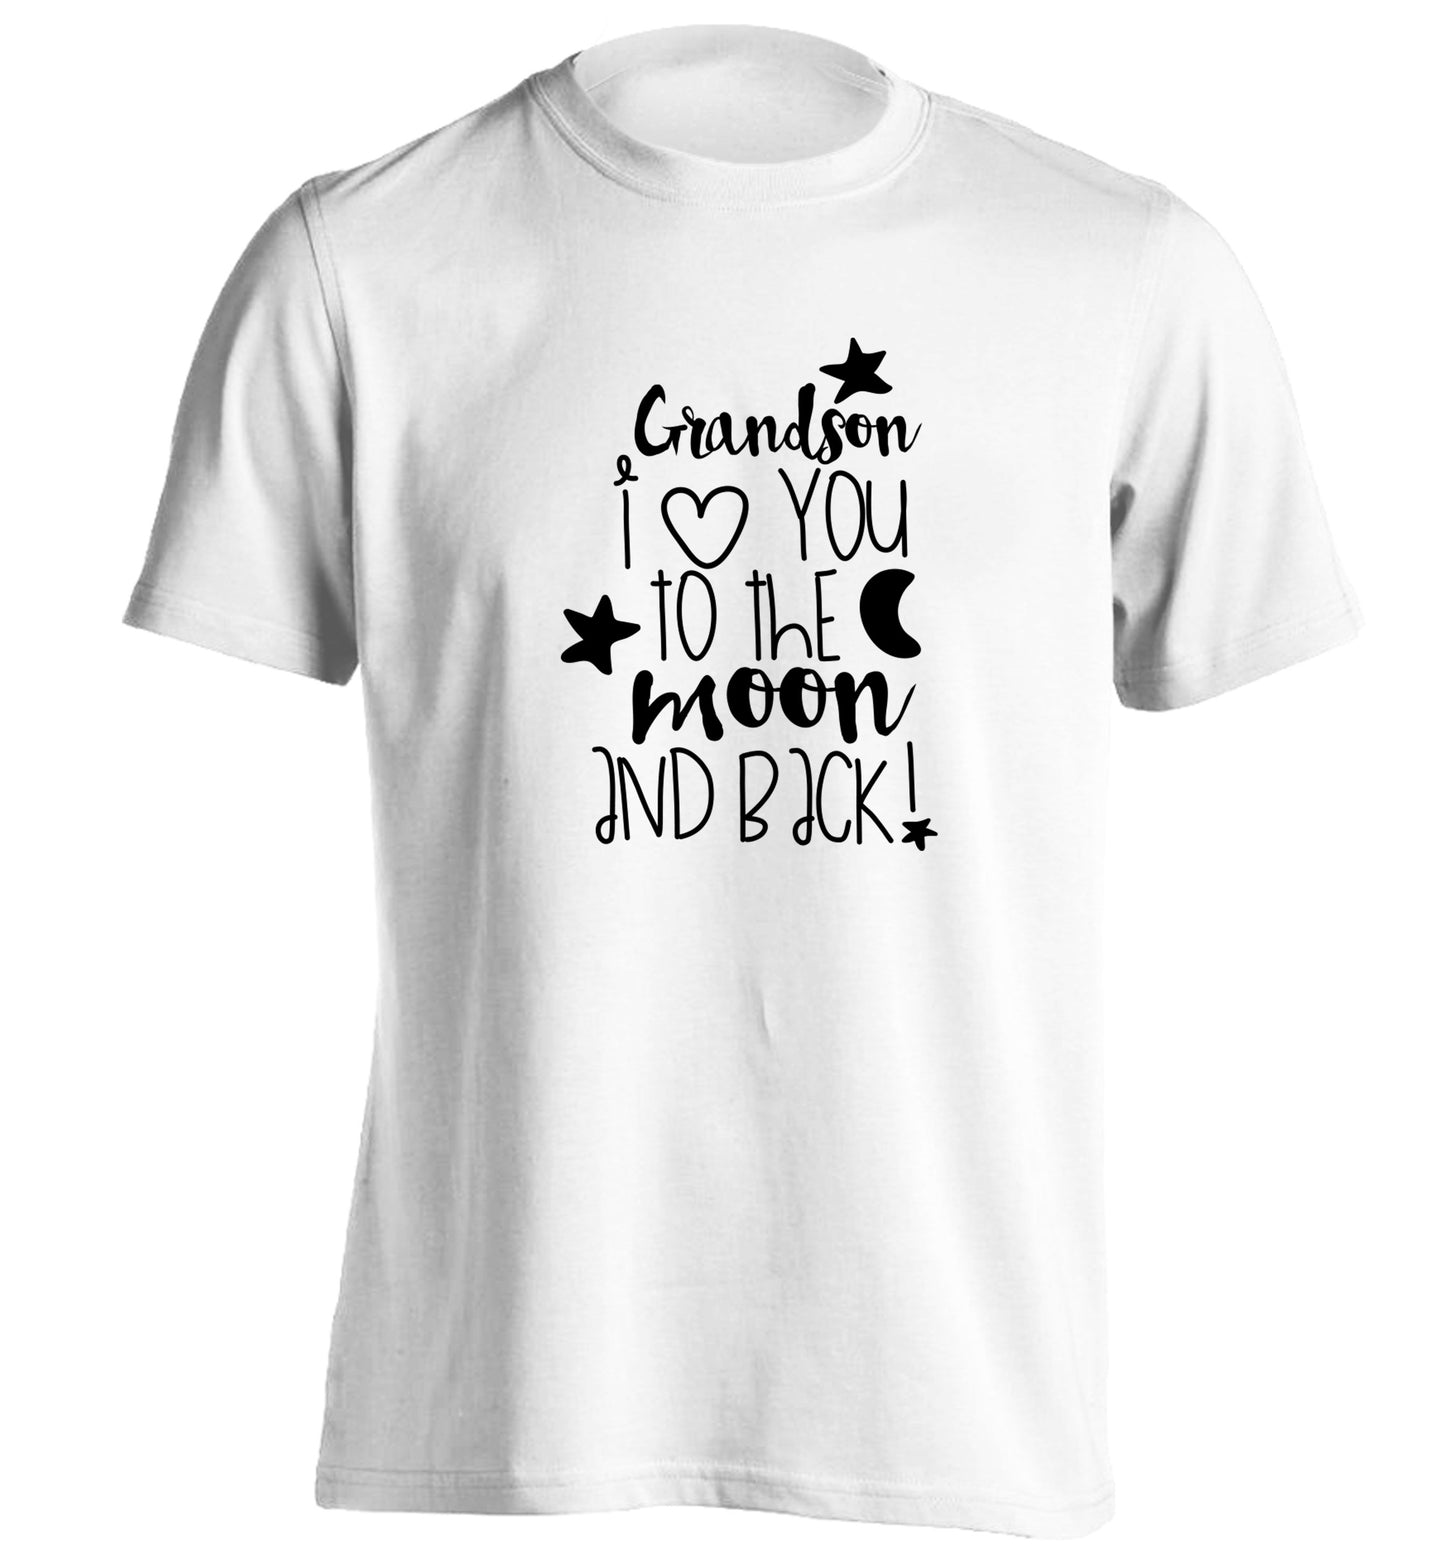 Grandson I love you to the moon and back adults unisex white Tshirt 2XL